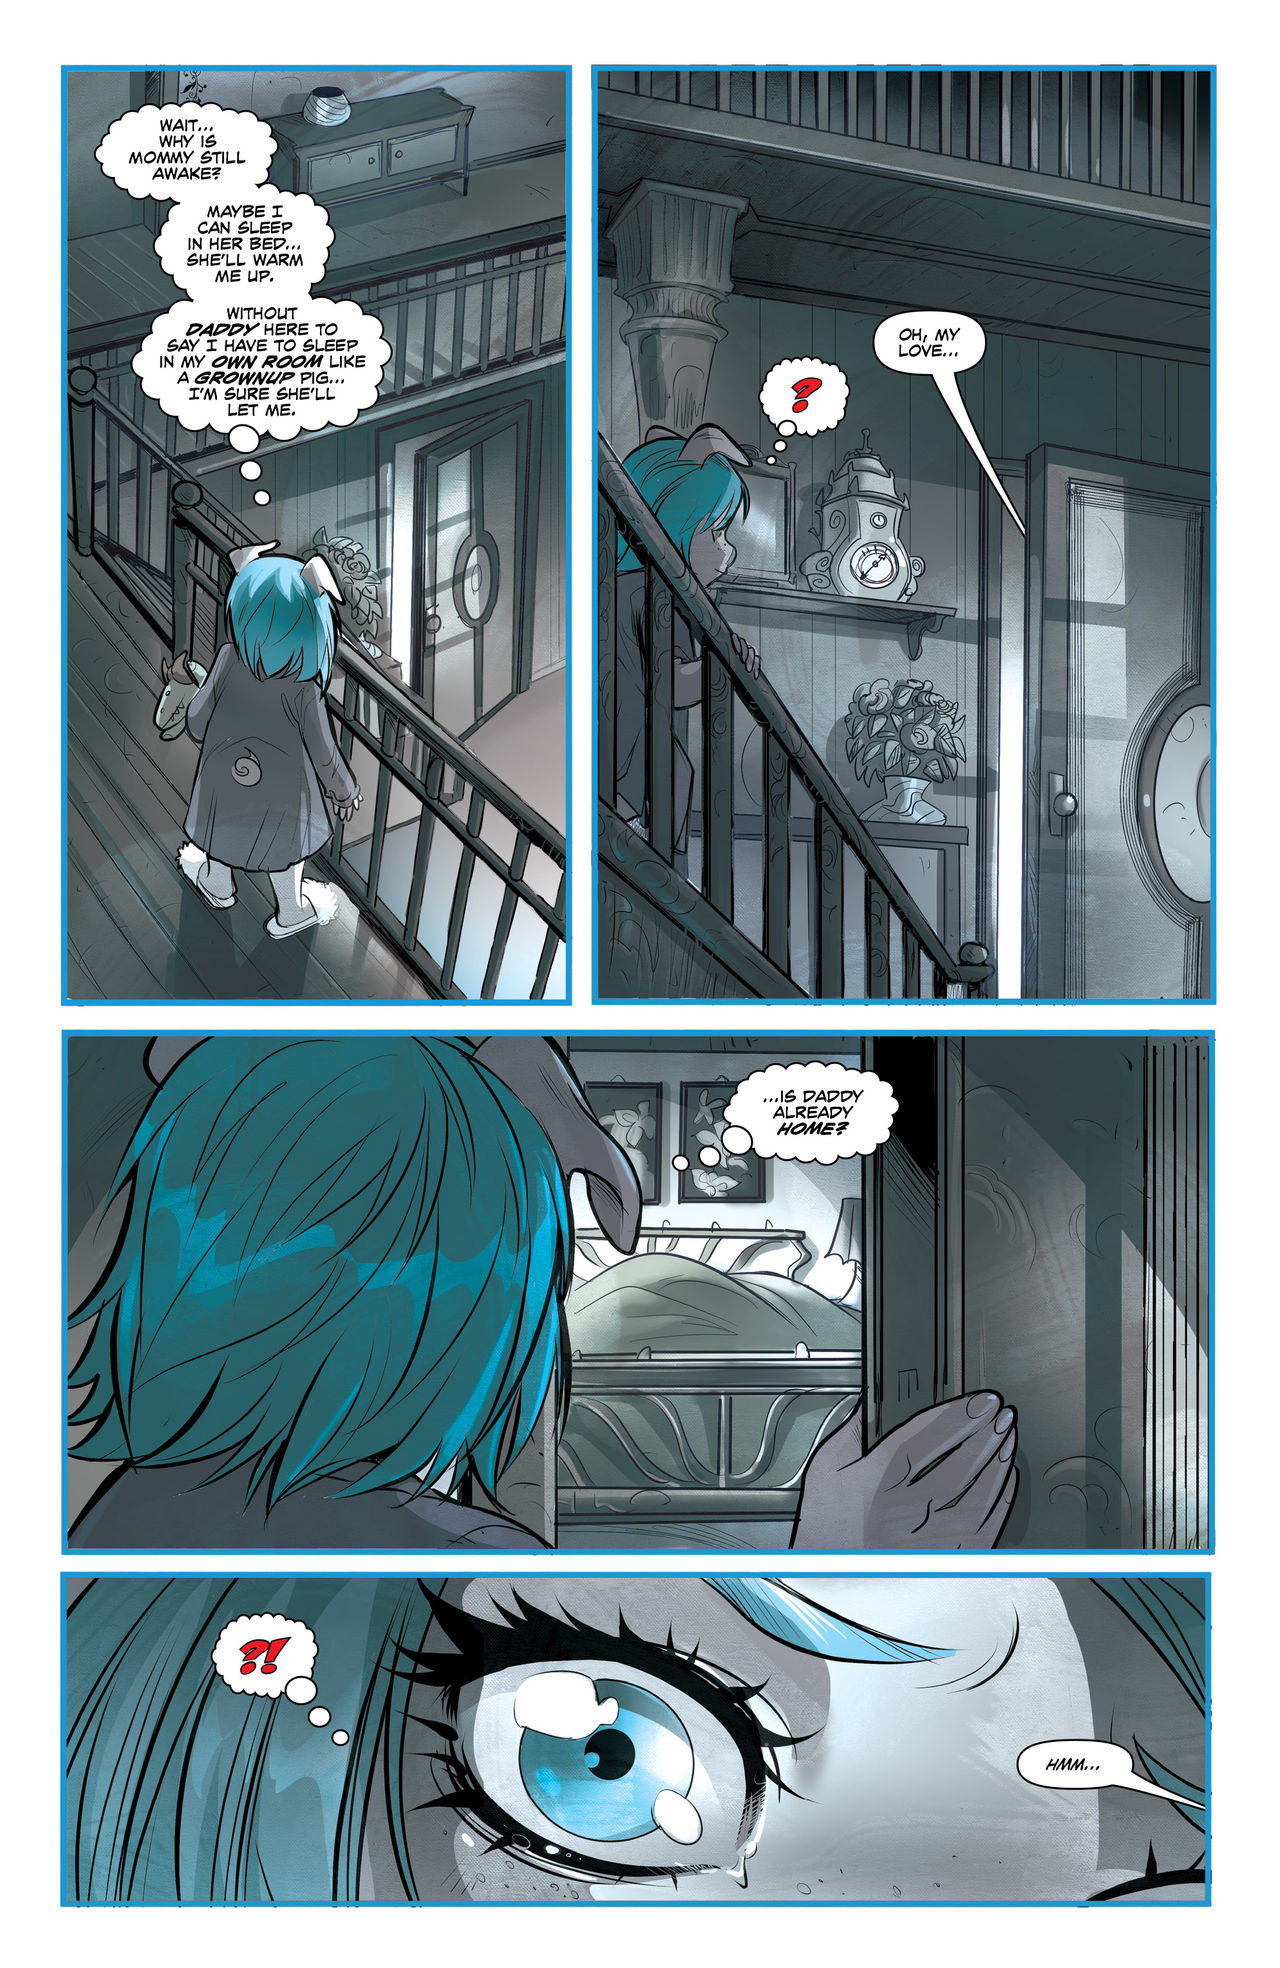 Unnatural Issue 2 by Mirka Andolfo page 9